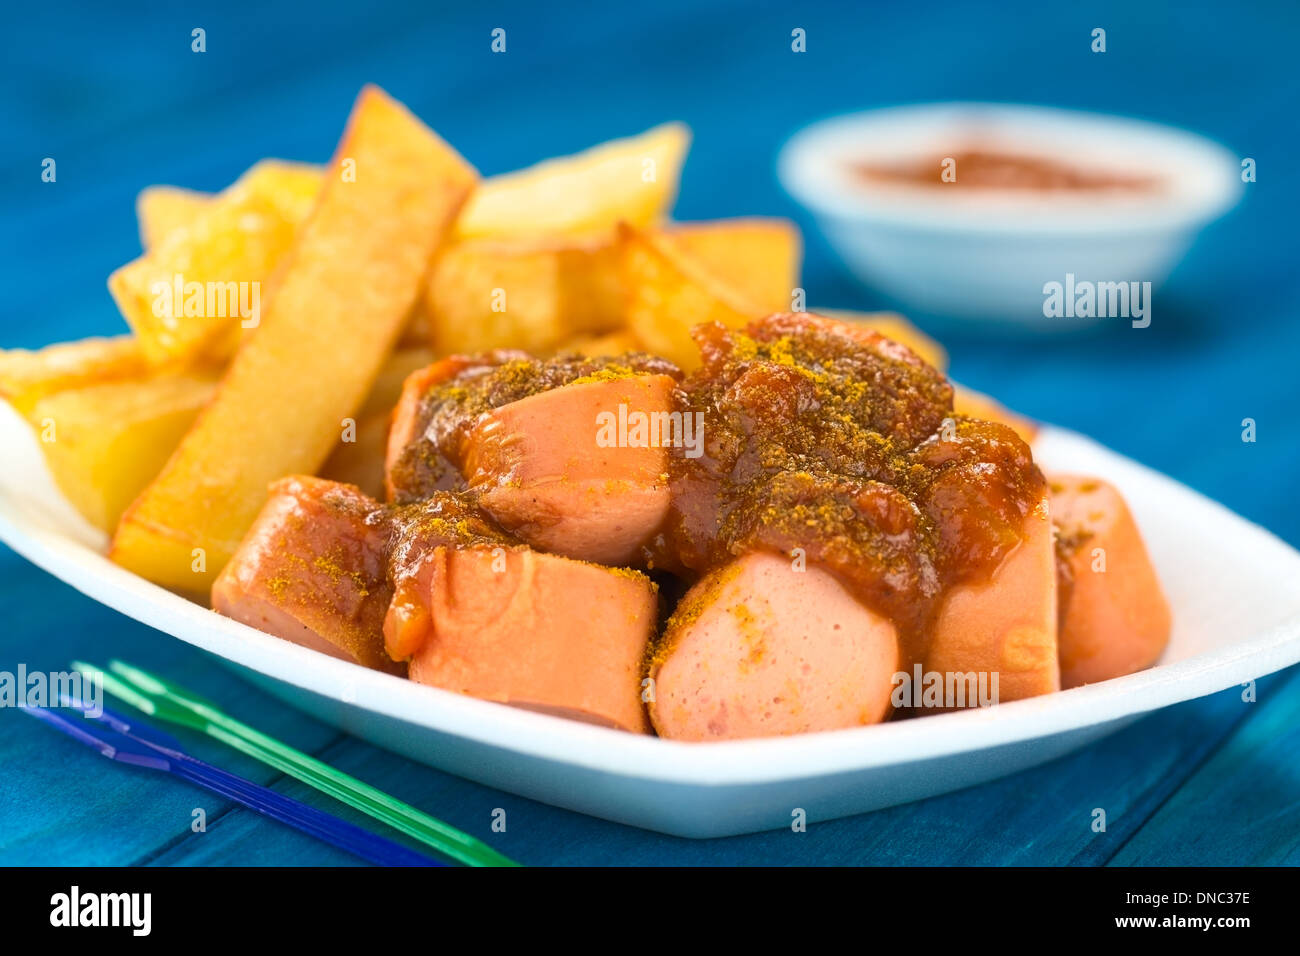 German fast food called Currywurst served with French fries on a disposable plate with party forks in the front Stock Photo